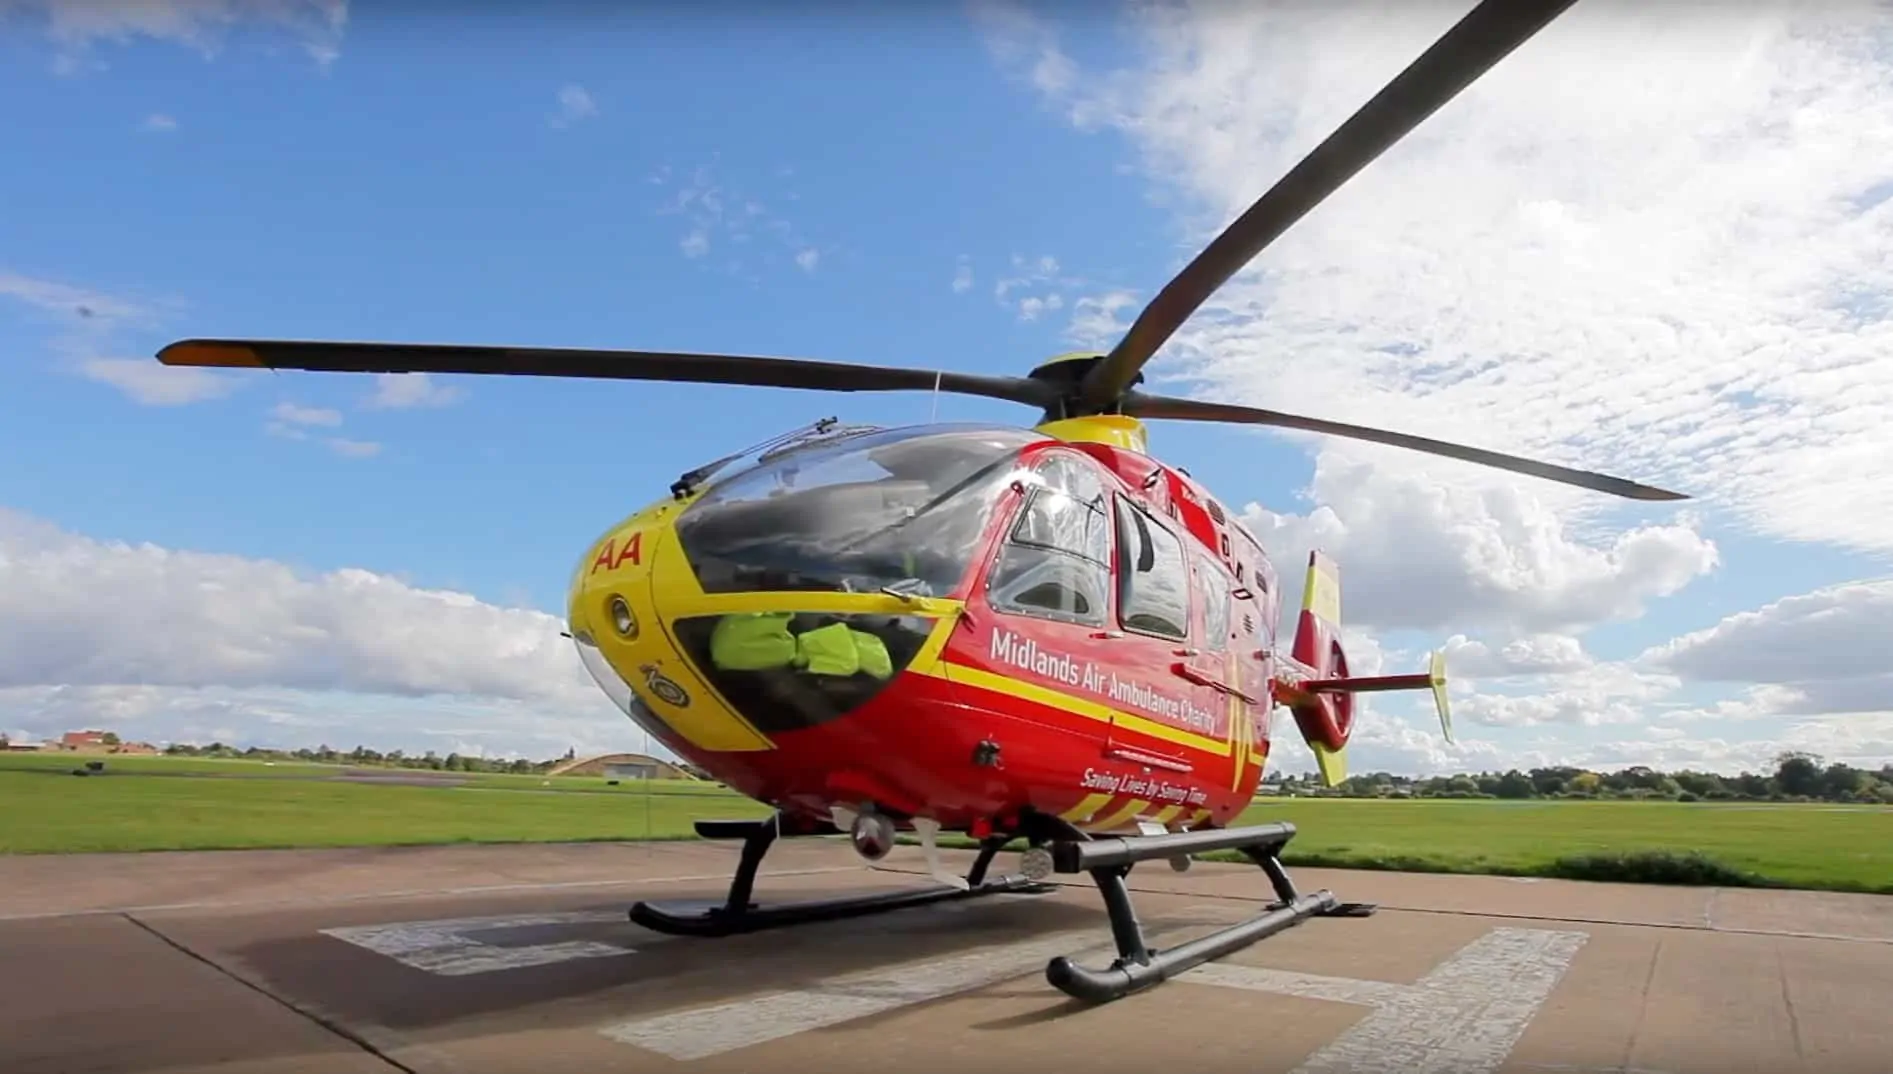 EBC Group provide a range of IT Services to Midlands Air Ambulance Charity, including IT Support, Connectivity and VoIP solutions.